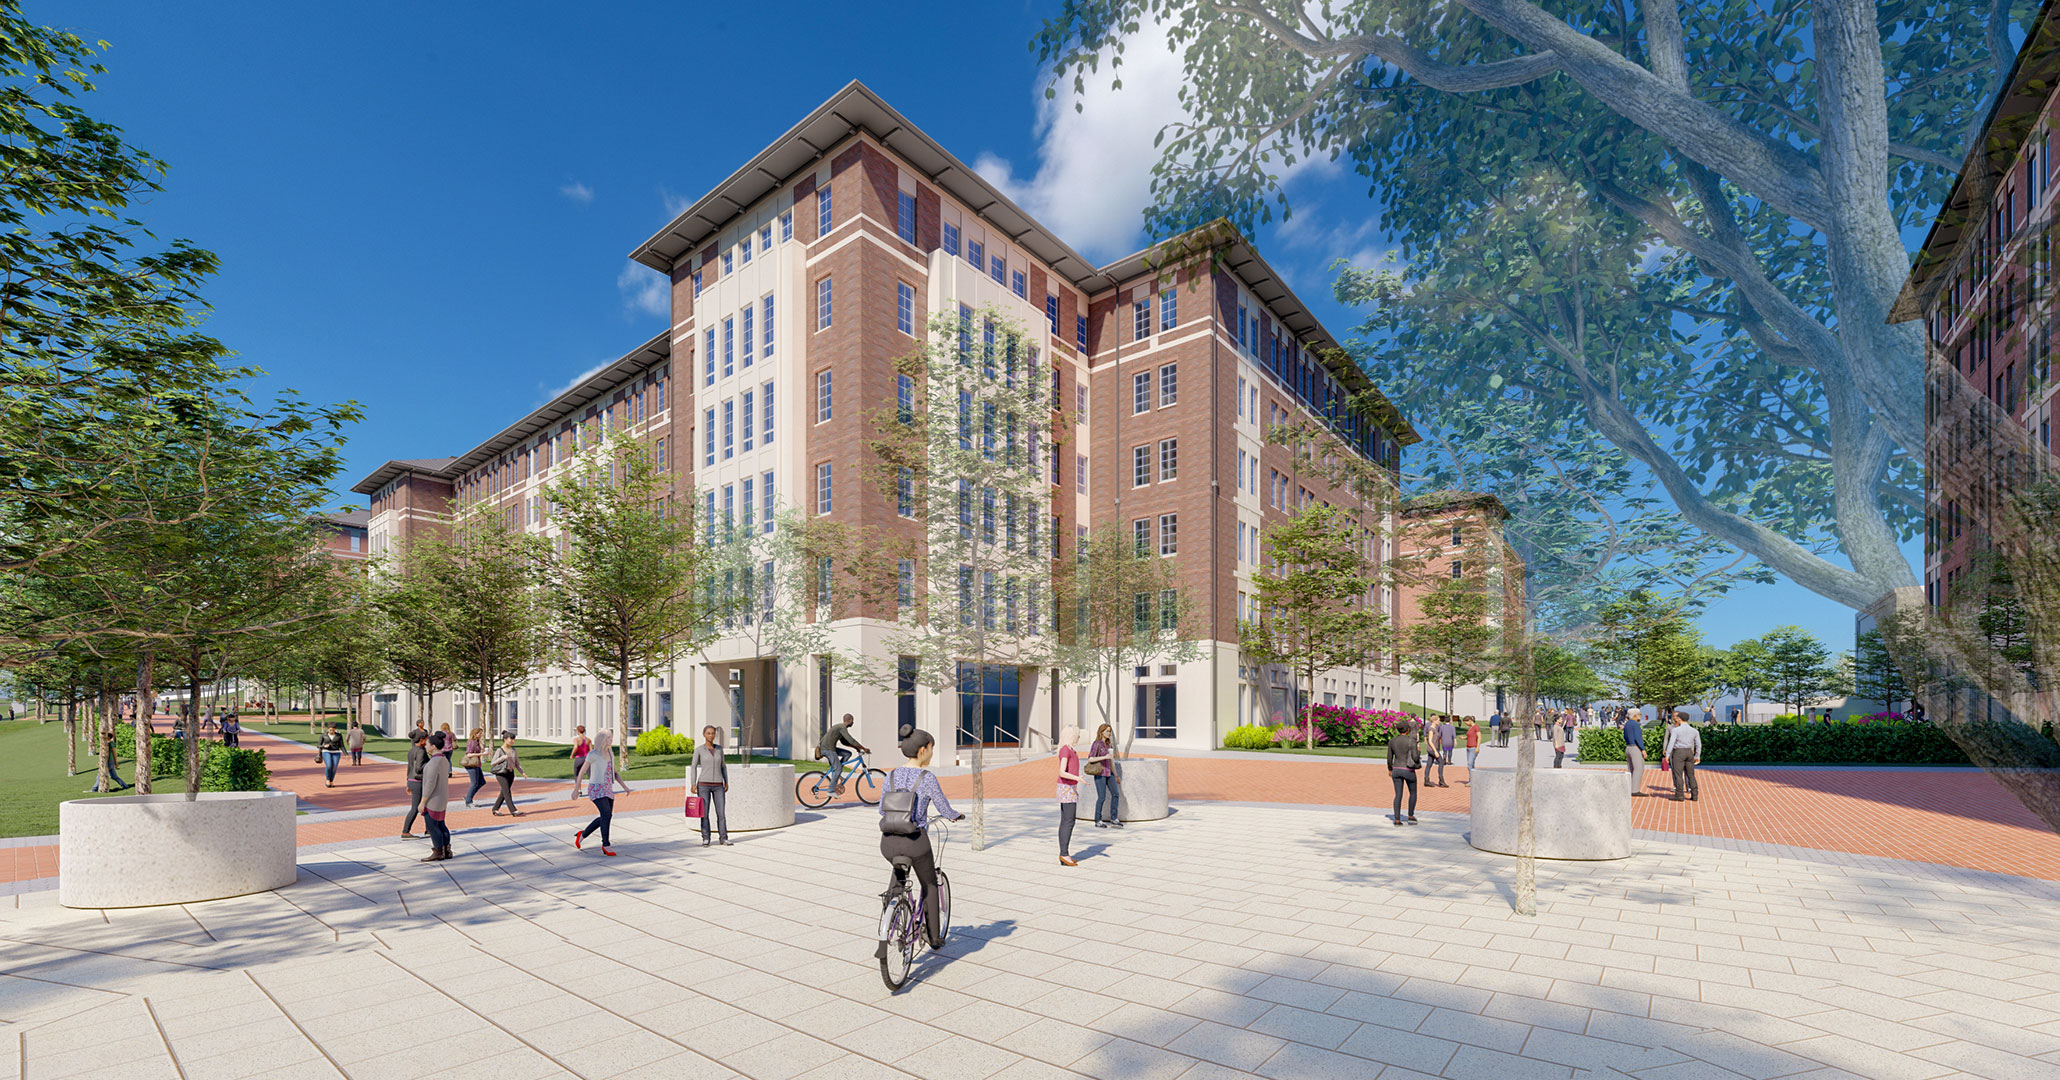 New development at UofSC Campus Village designed by Boudreaux architects in Columbia, SC.